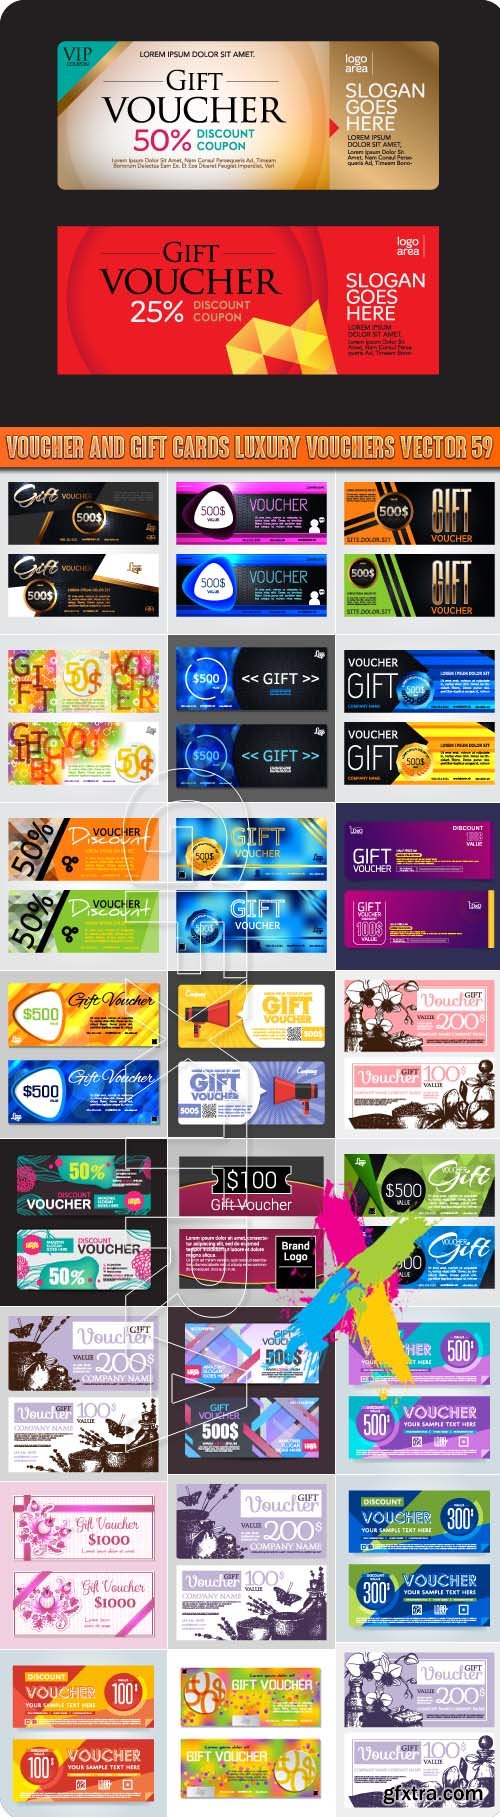 Voucher and gift cards luxury vouchers vector 59